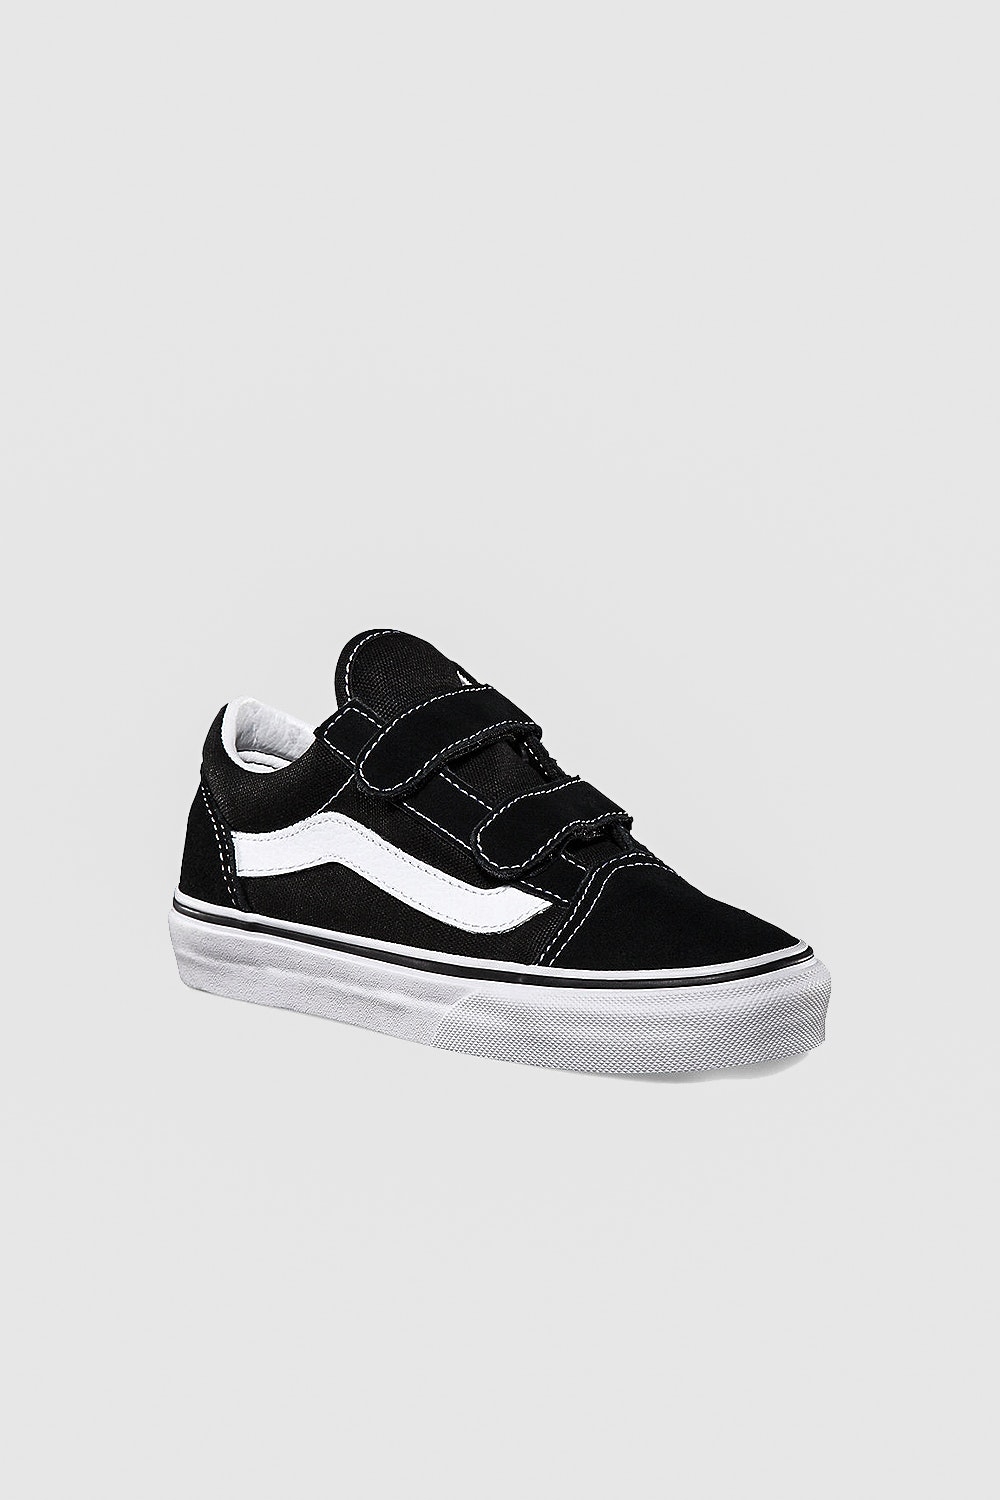 vans youth clothing